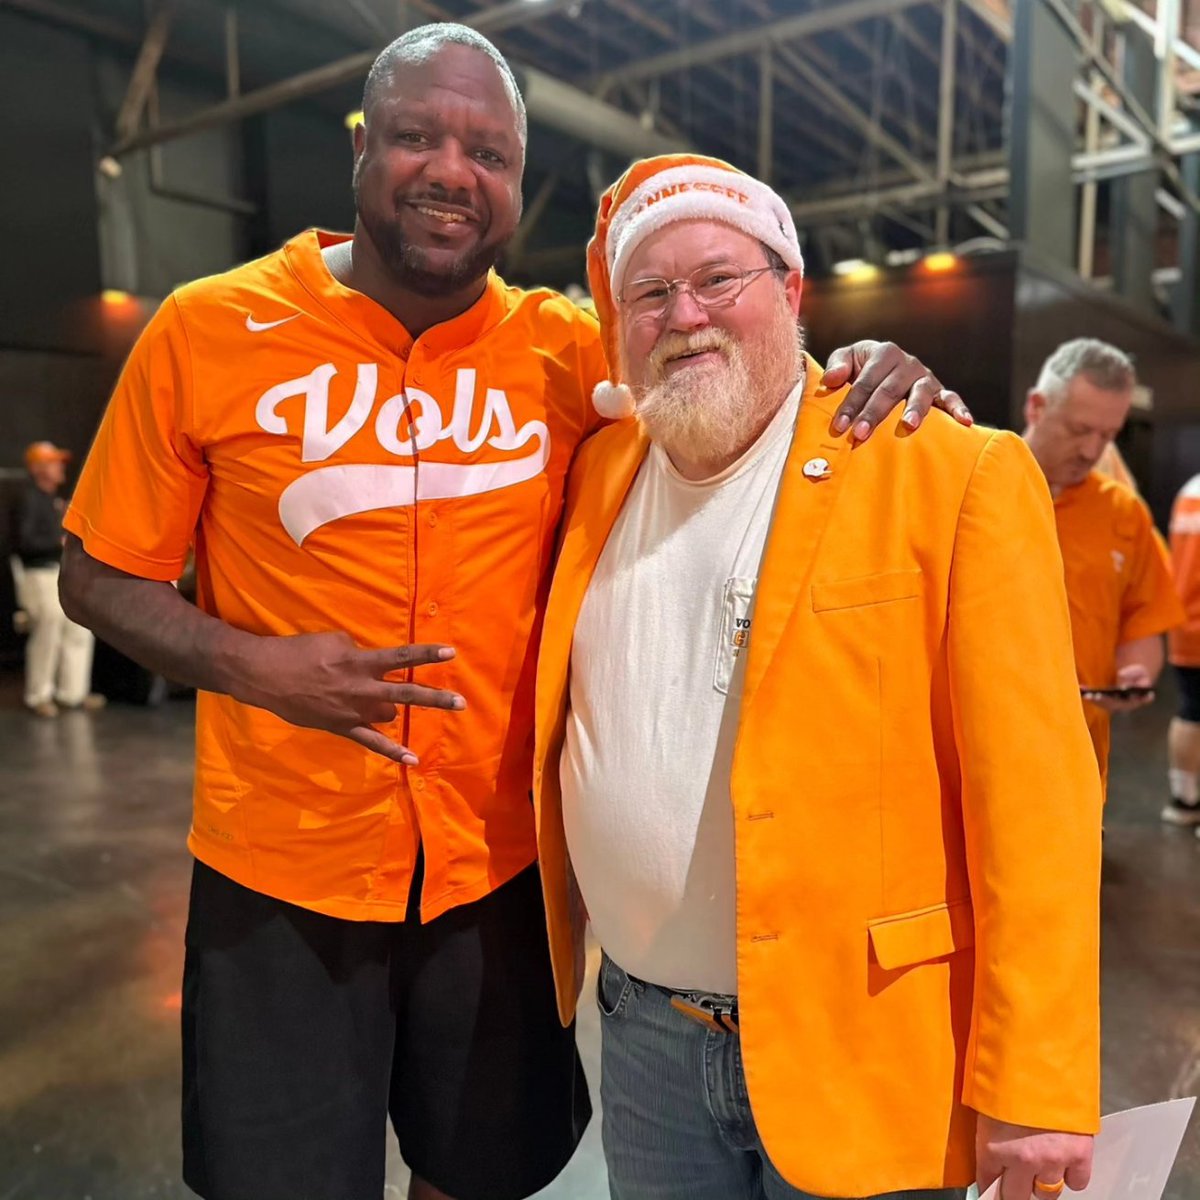 It was great catching up with @TheRonSlay at the Big Orange Caravan last night! I thought it'd be nice to start off the month with a giveaway! If you'd like a chance to win this signed picture of Mr Slay comment 'In the building' Good Luck, God Bless, Go Big Orange!